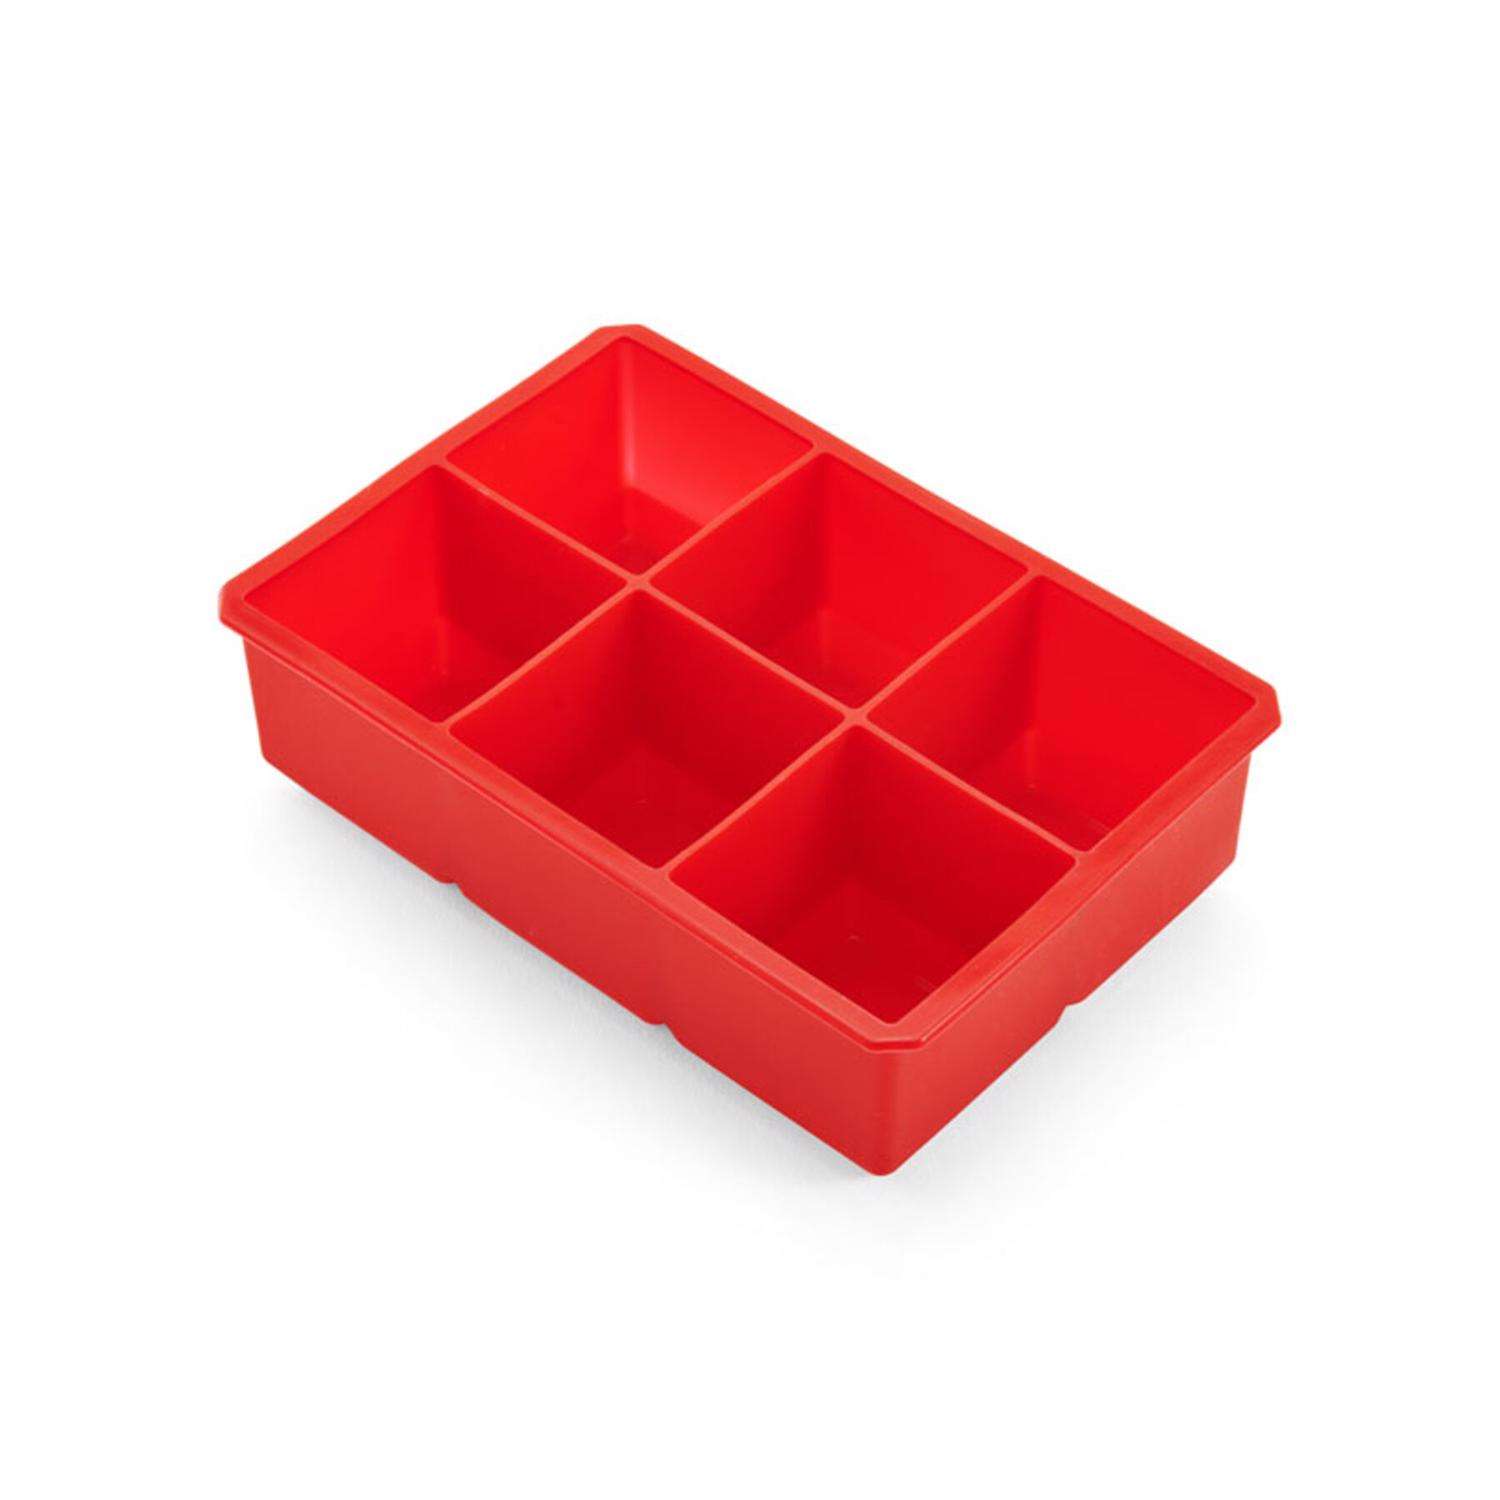 USA America Ice Cube Tray Silicone United States - 4th of July US Seller